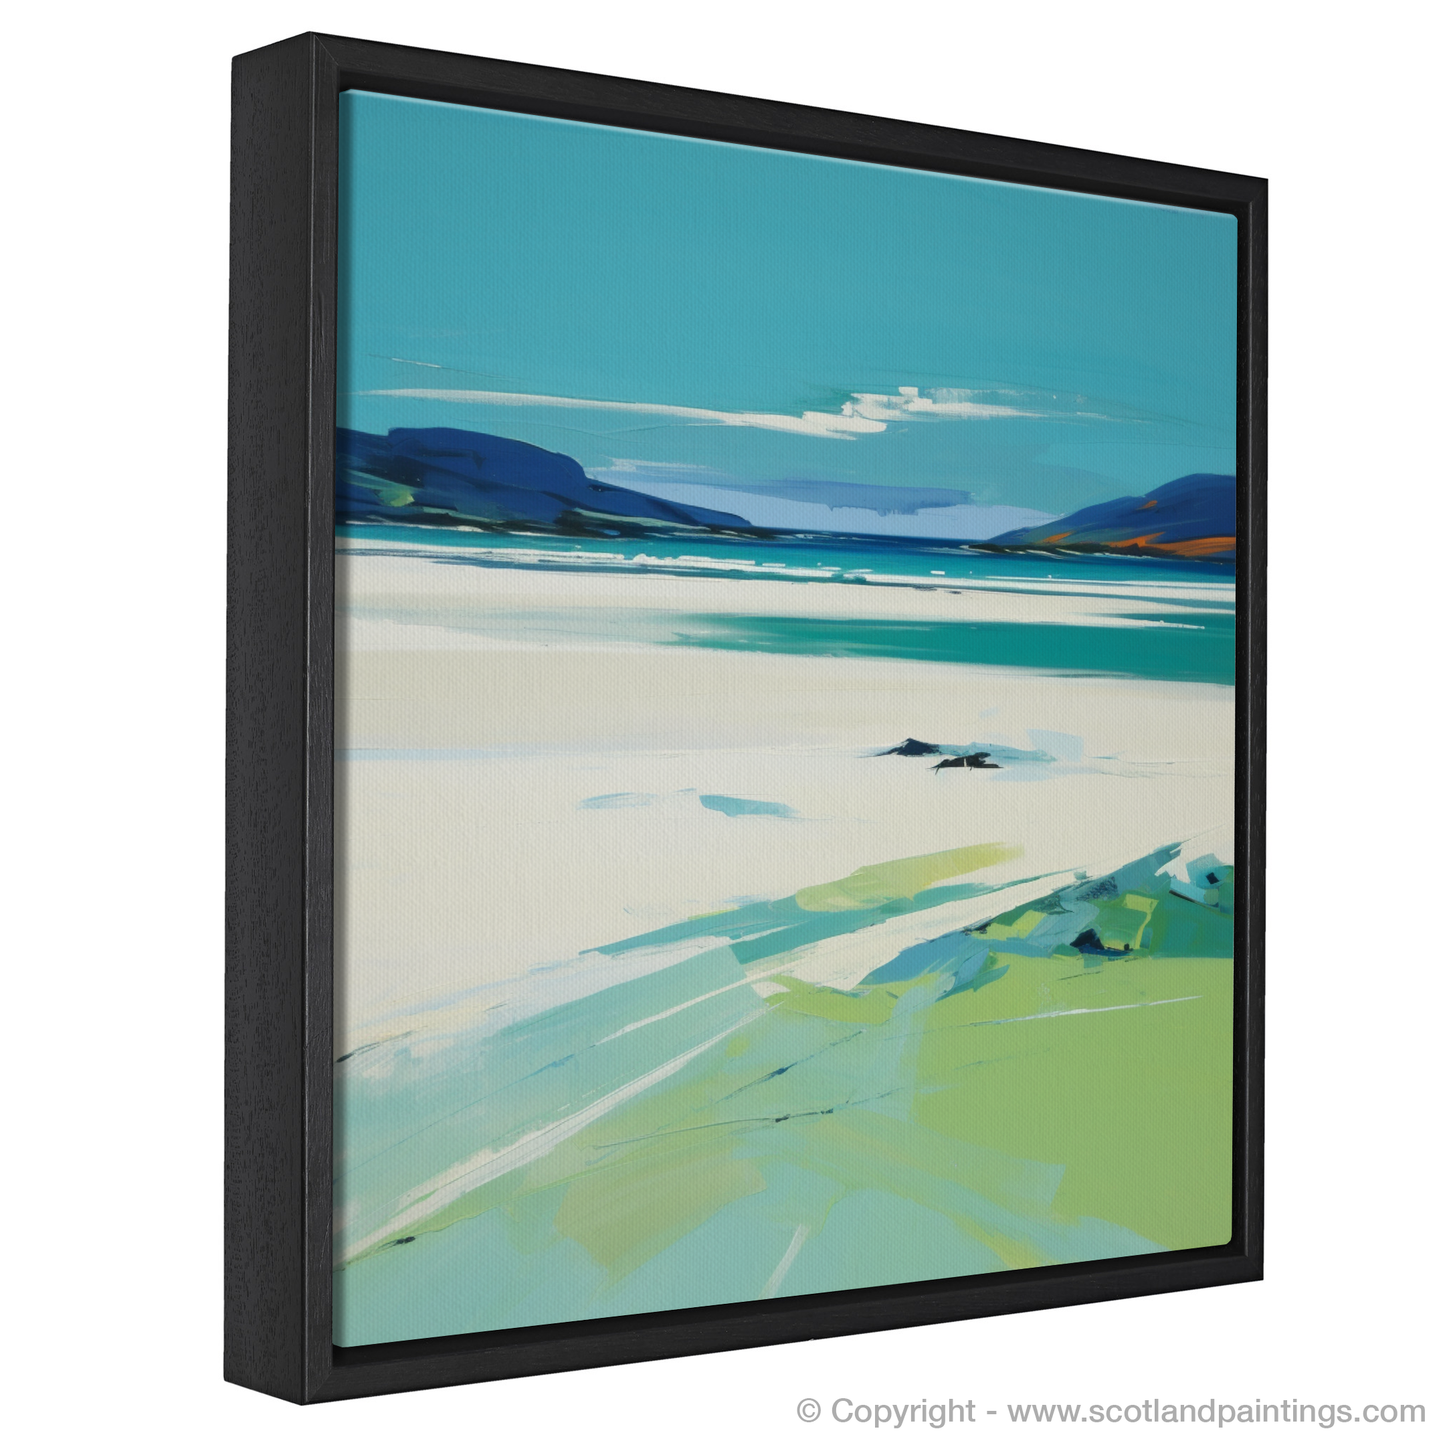 Luskentyre Sands: A Contemporary Ode to Scottish Shores